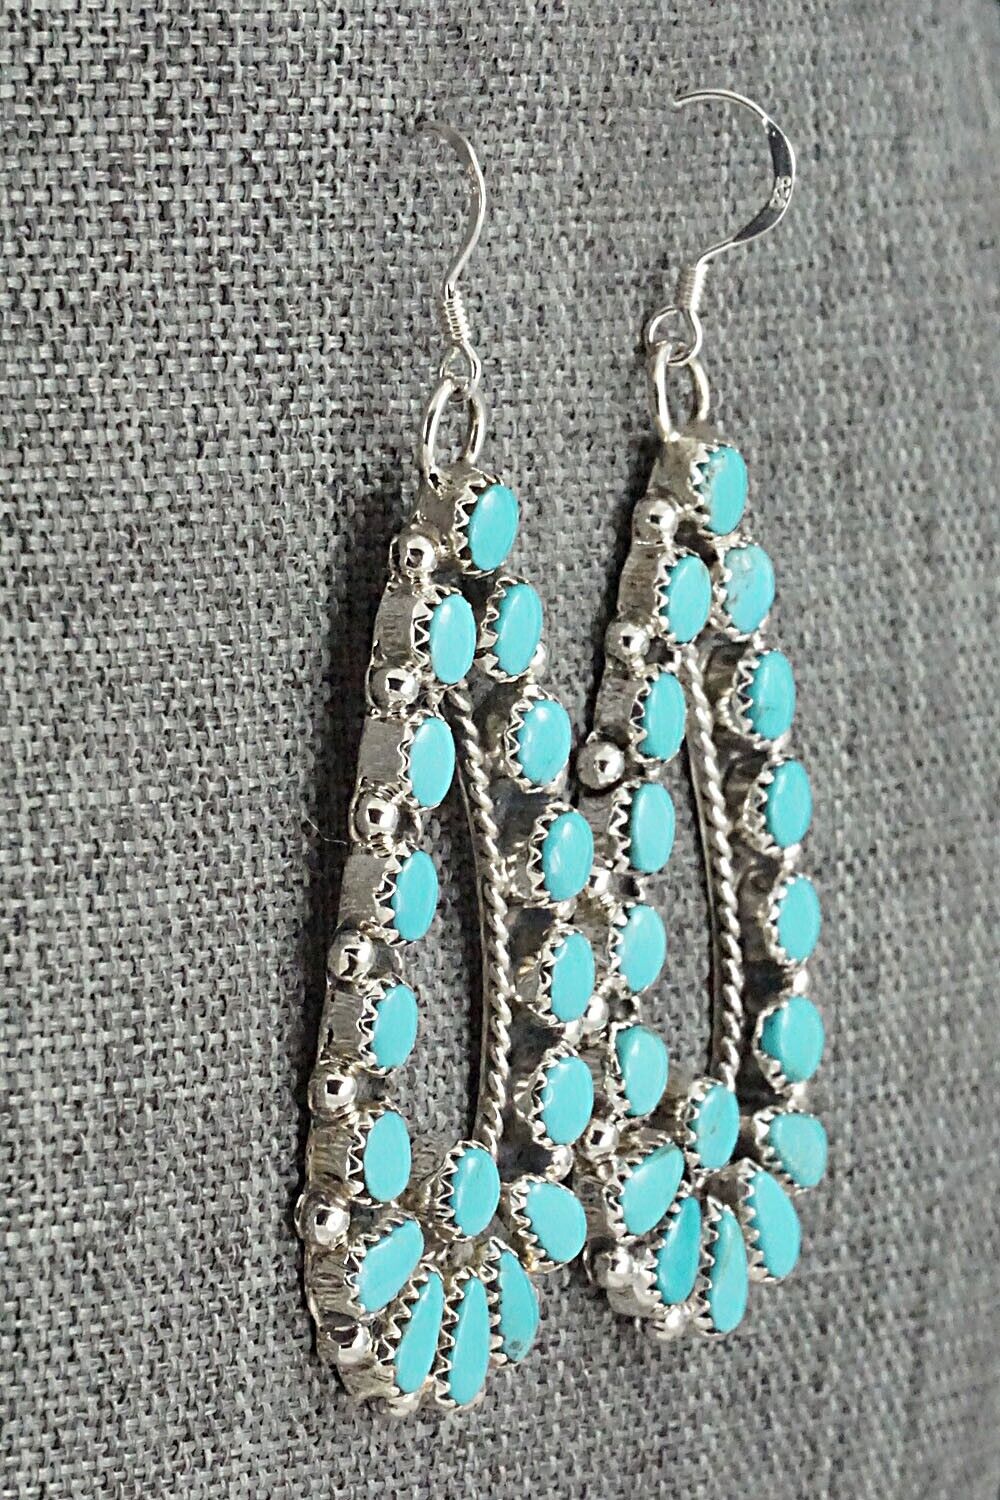 Turquoise & Sterling Silver Earrings - Alicia Wilson